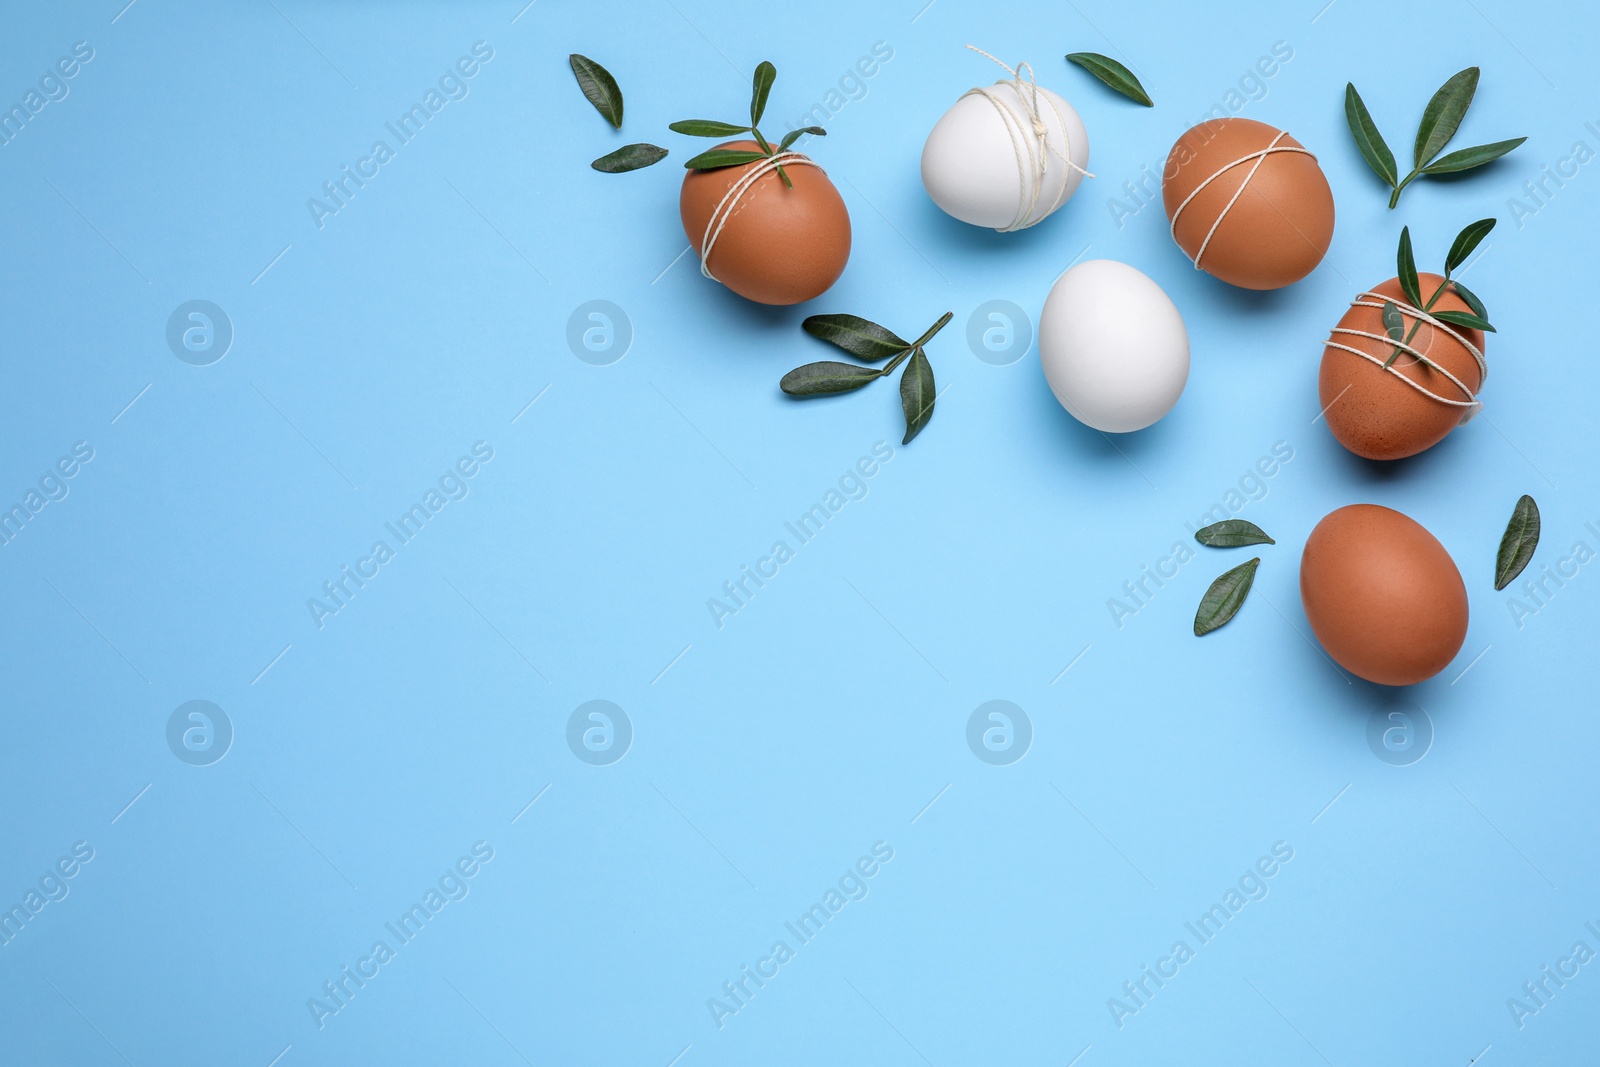 Photo of Beautifully decorated Easter eggs and green leaves on light blue background, flat lay. Space for text